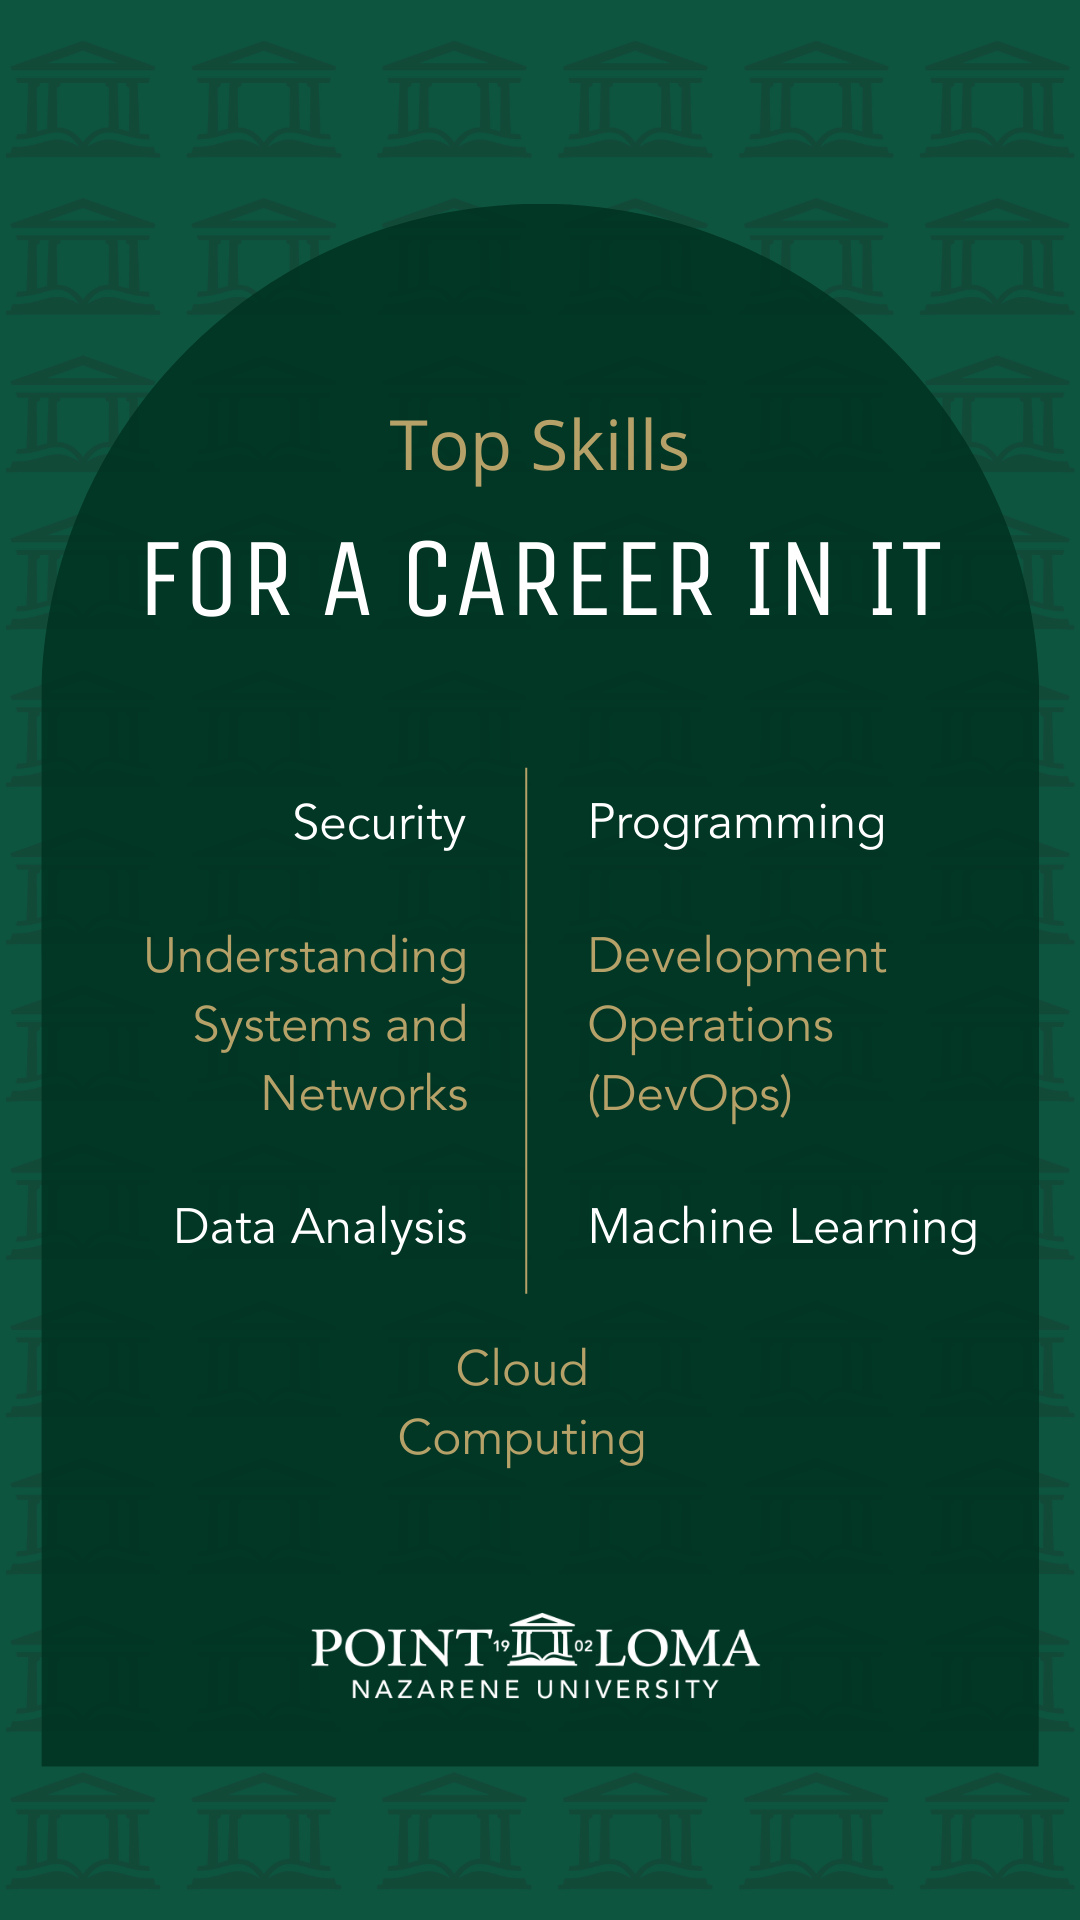 top skills for a career in IT: security, understanding systems and networks, data analysis, cloud computing, programming, development operations (DevOps), machine learning